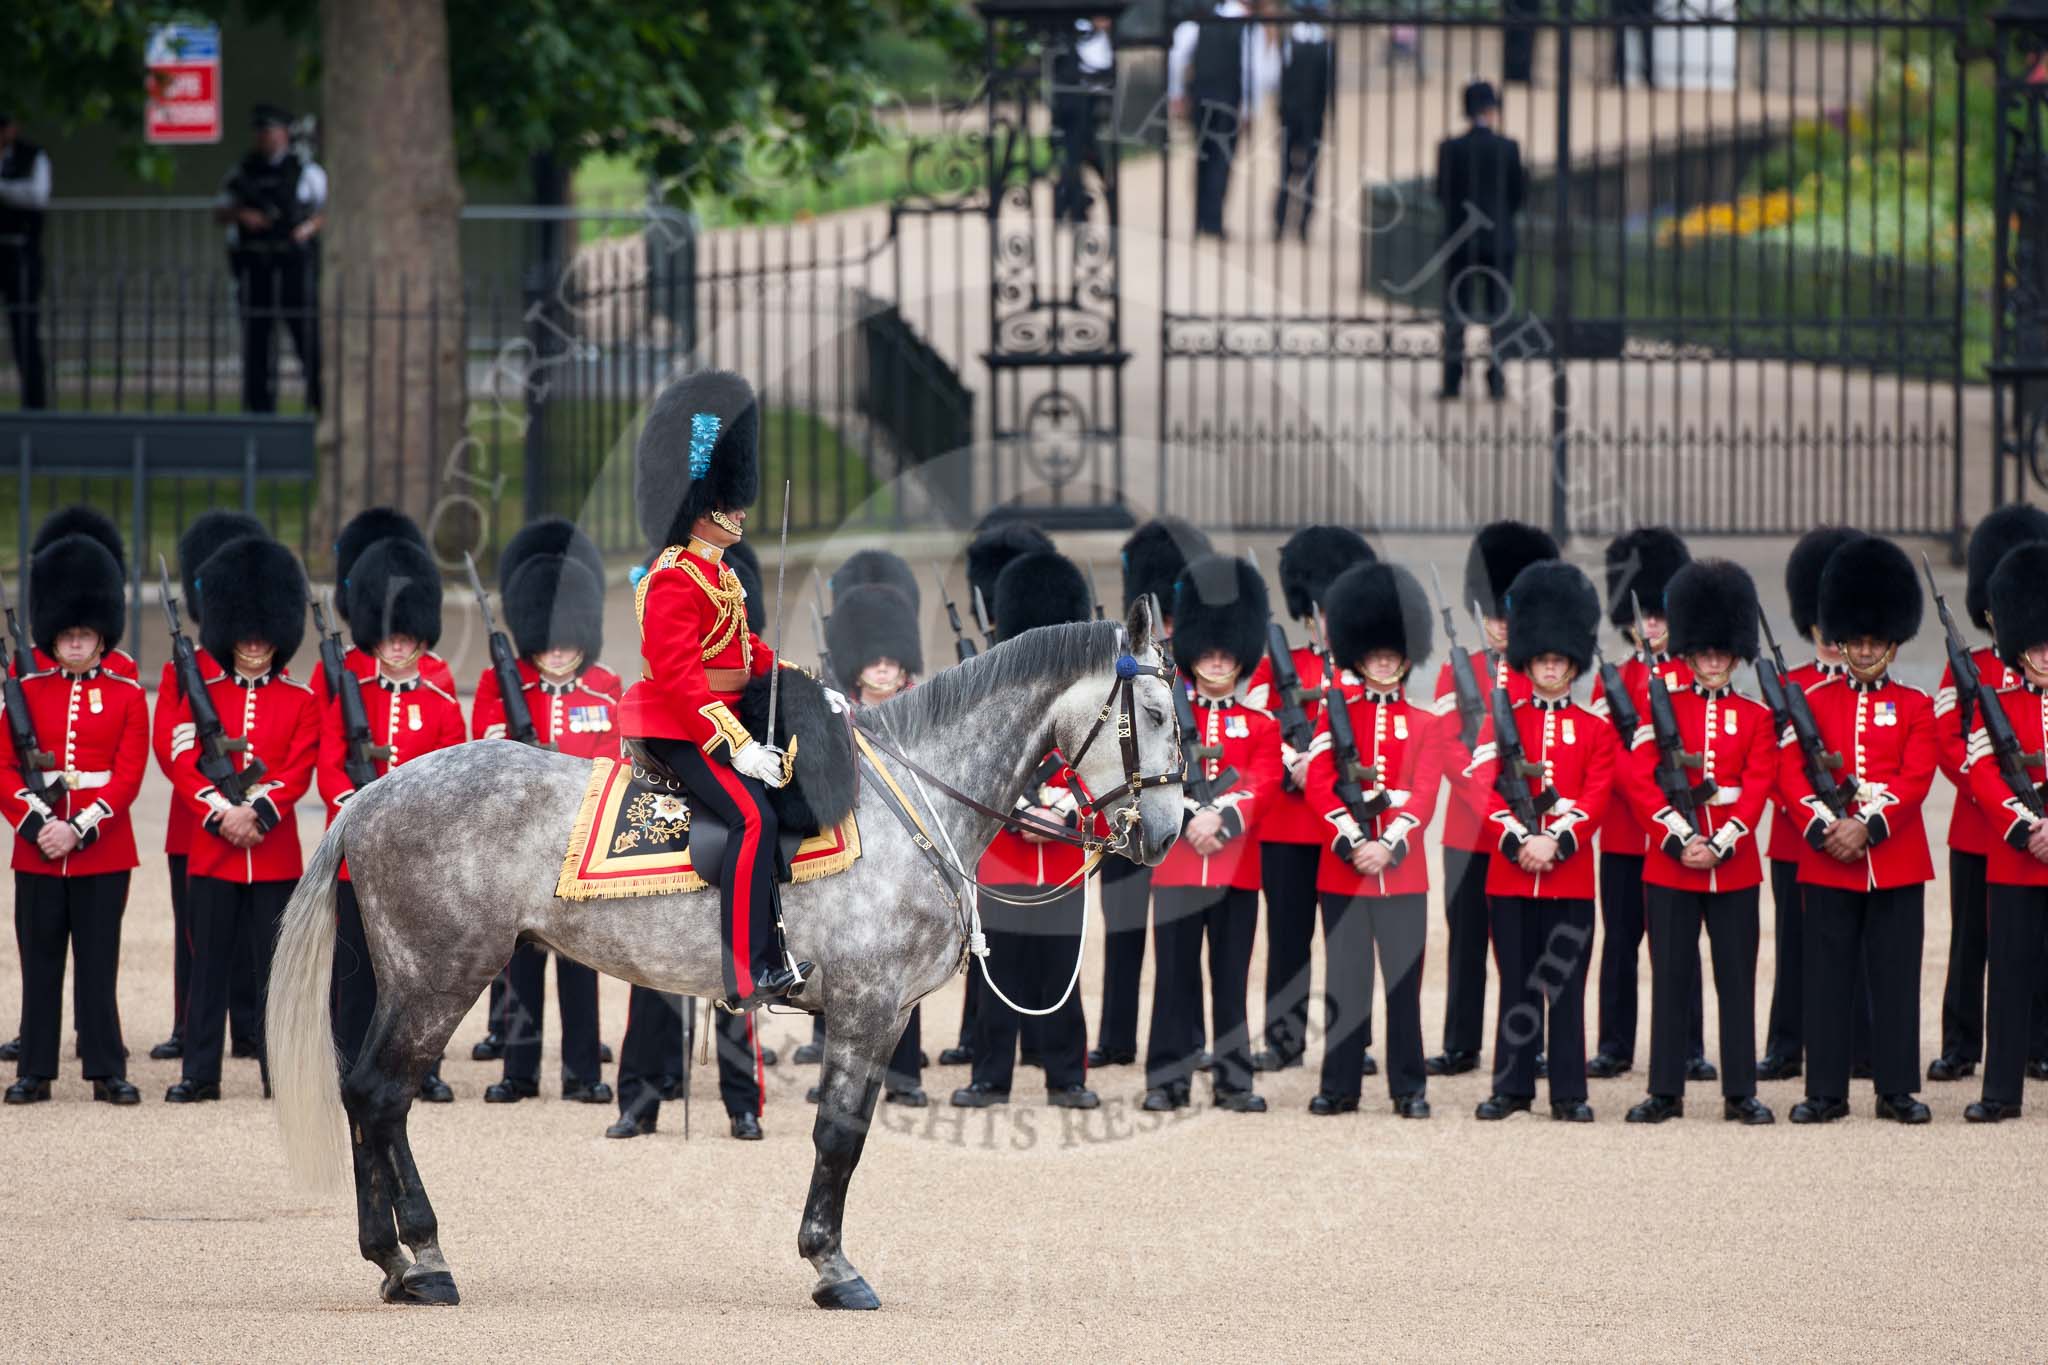 Trooping the Colour 2009: The Field Officer in Brigade Waiting, Lieutenant Colonel B C Farrell, Irish Guards, on 'Wellesley'., in front of No. 4 Guard. In the background the gate of St. James's Park..
Horse Guards Parade, Westminster,
London SW1,

United Kingdom,
on 13 June 2009 at 10:45, image #87